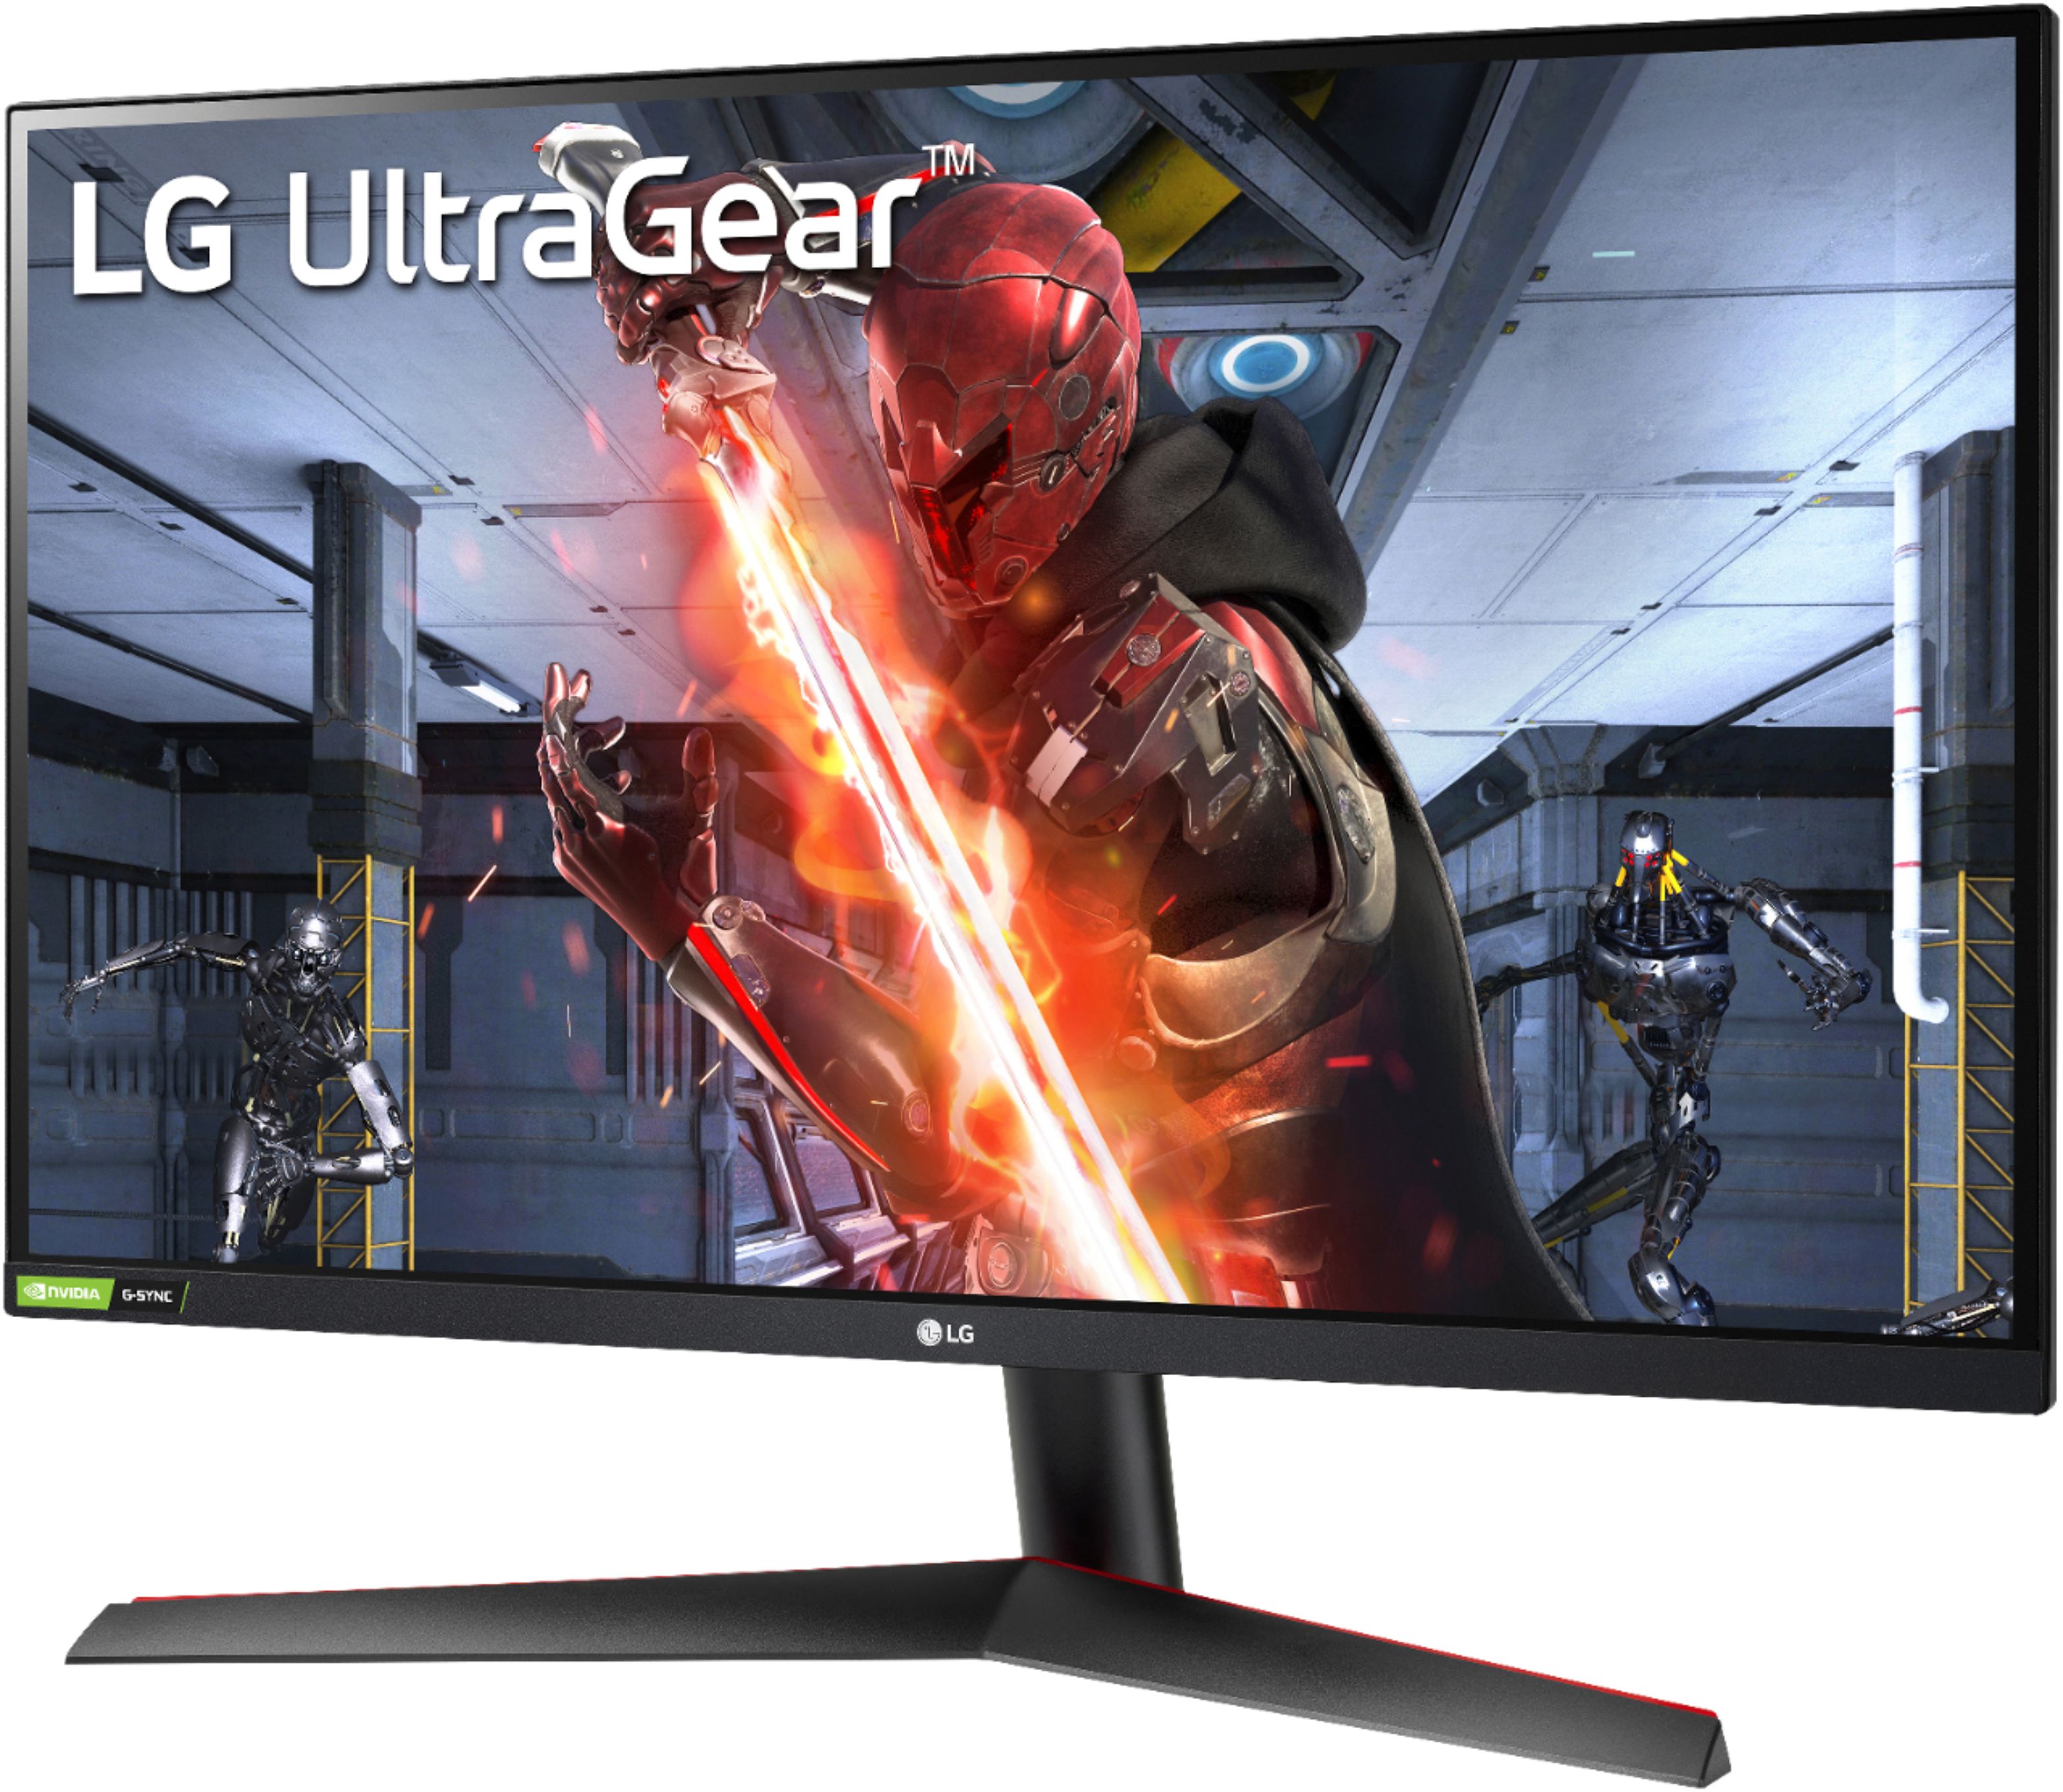 Left View: LG - UltraGear 27" IPS LED FHD G-Sync Compatible Monitor with HDR (DisplayPort, HDMI) - Black